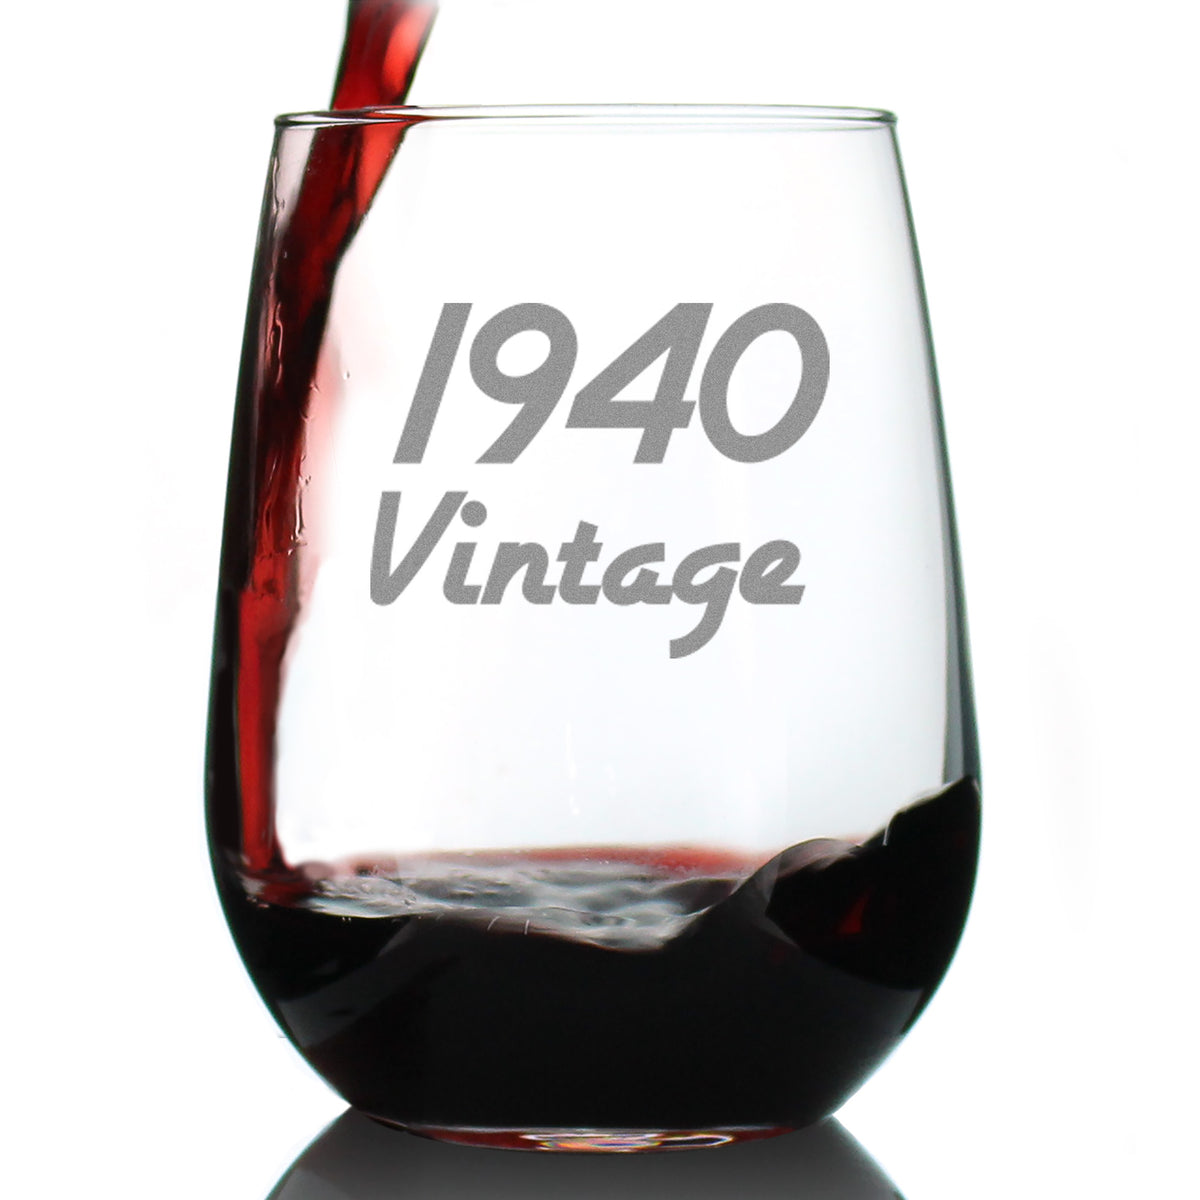 Vintage 1940 - 84th Birthday Stemless Wine Glass Gifts for Women &amp; Men Turning 84 - Bday Party Decor - Large Glasses